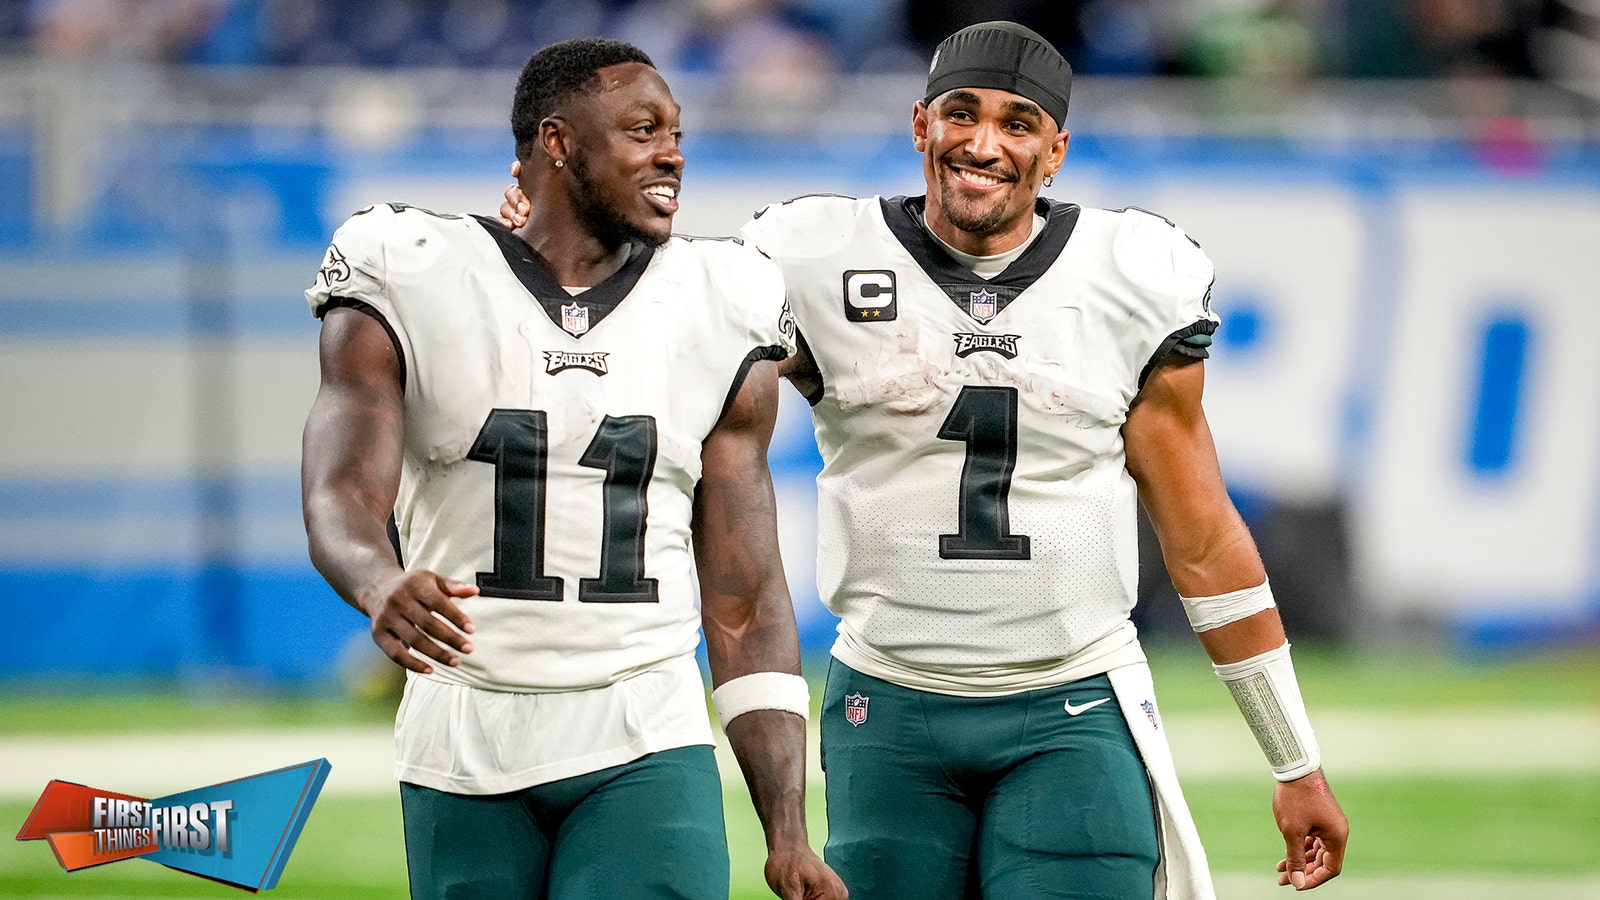 Jalen Hurts, A.J. Brown have heated exchange in Eagles' win